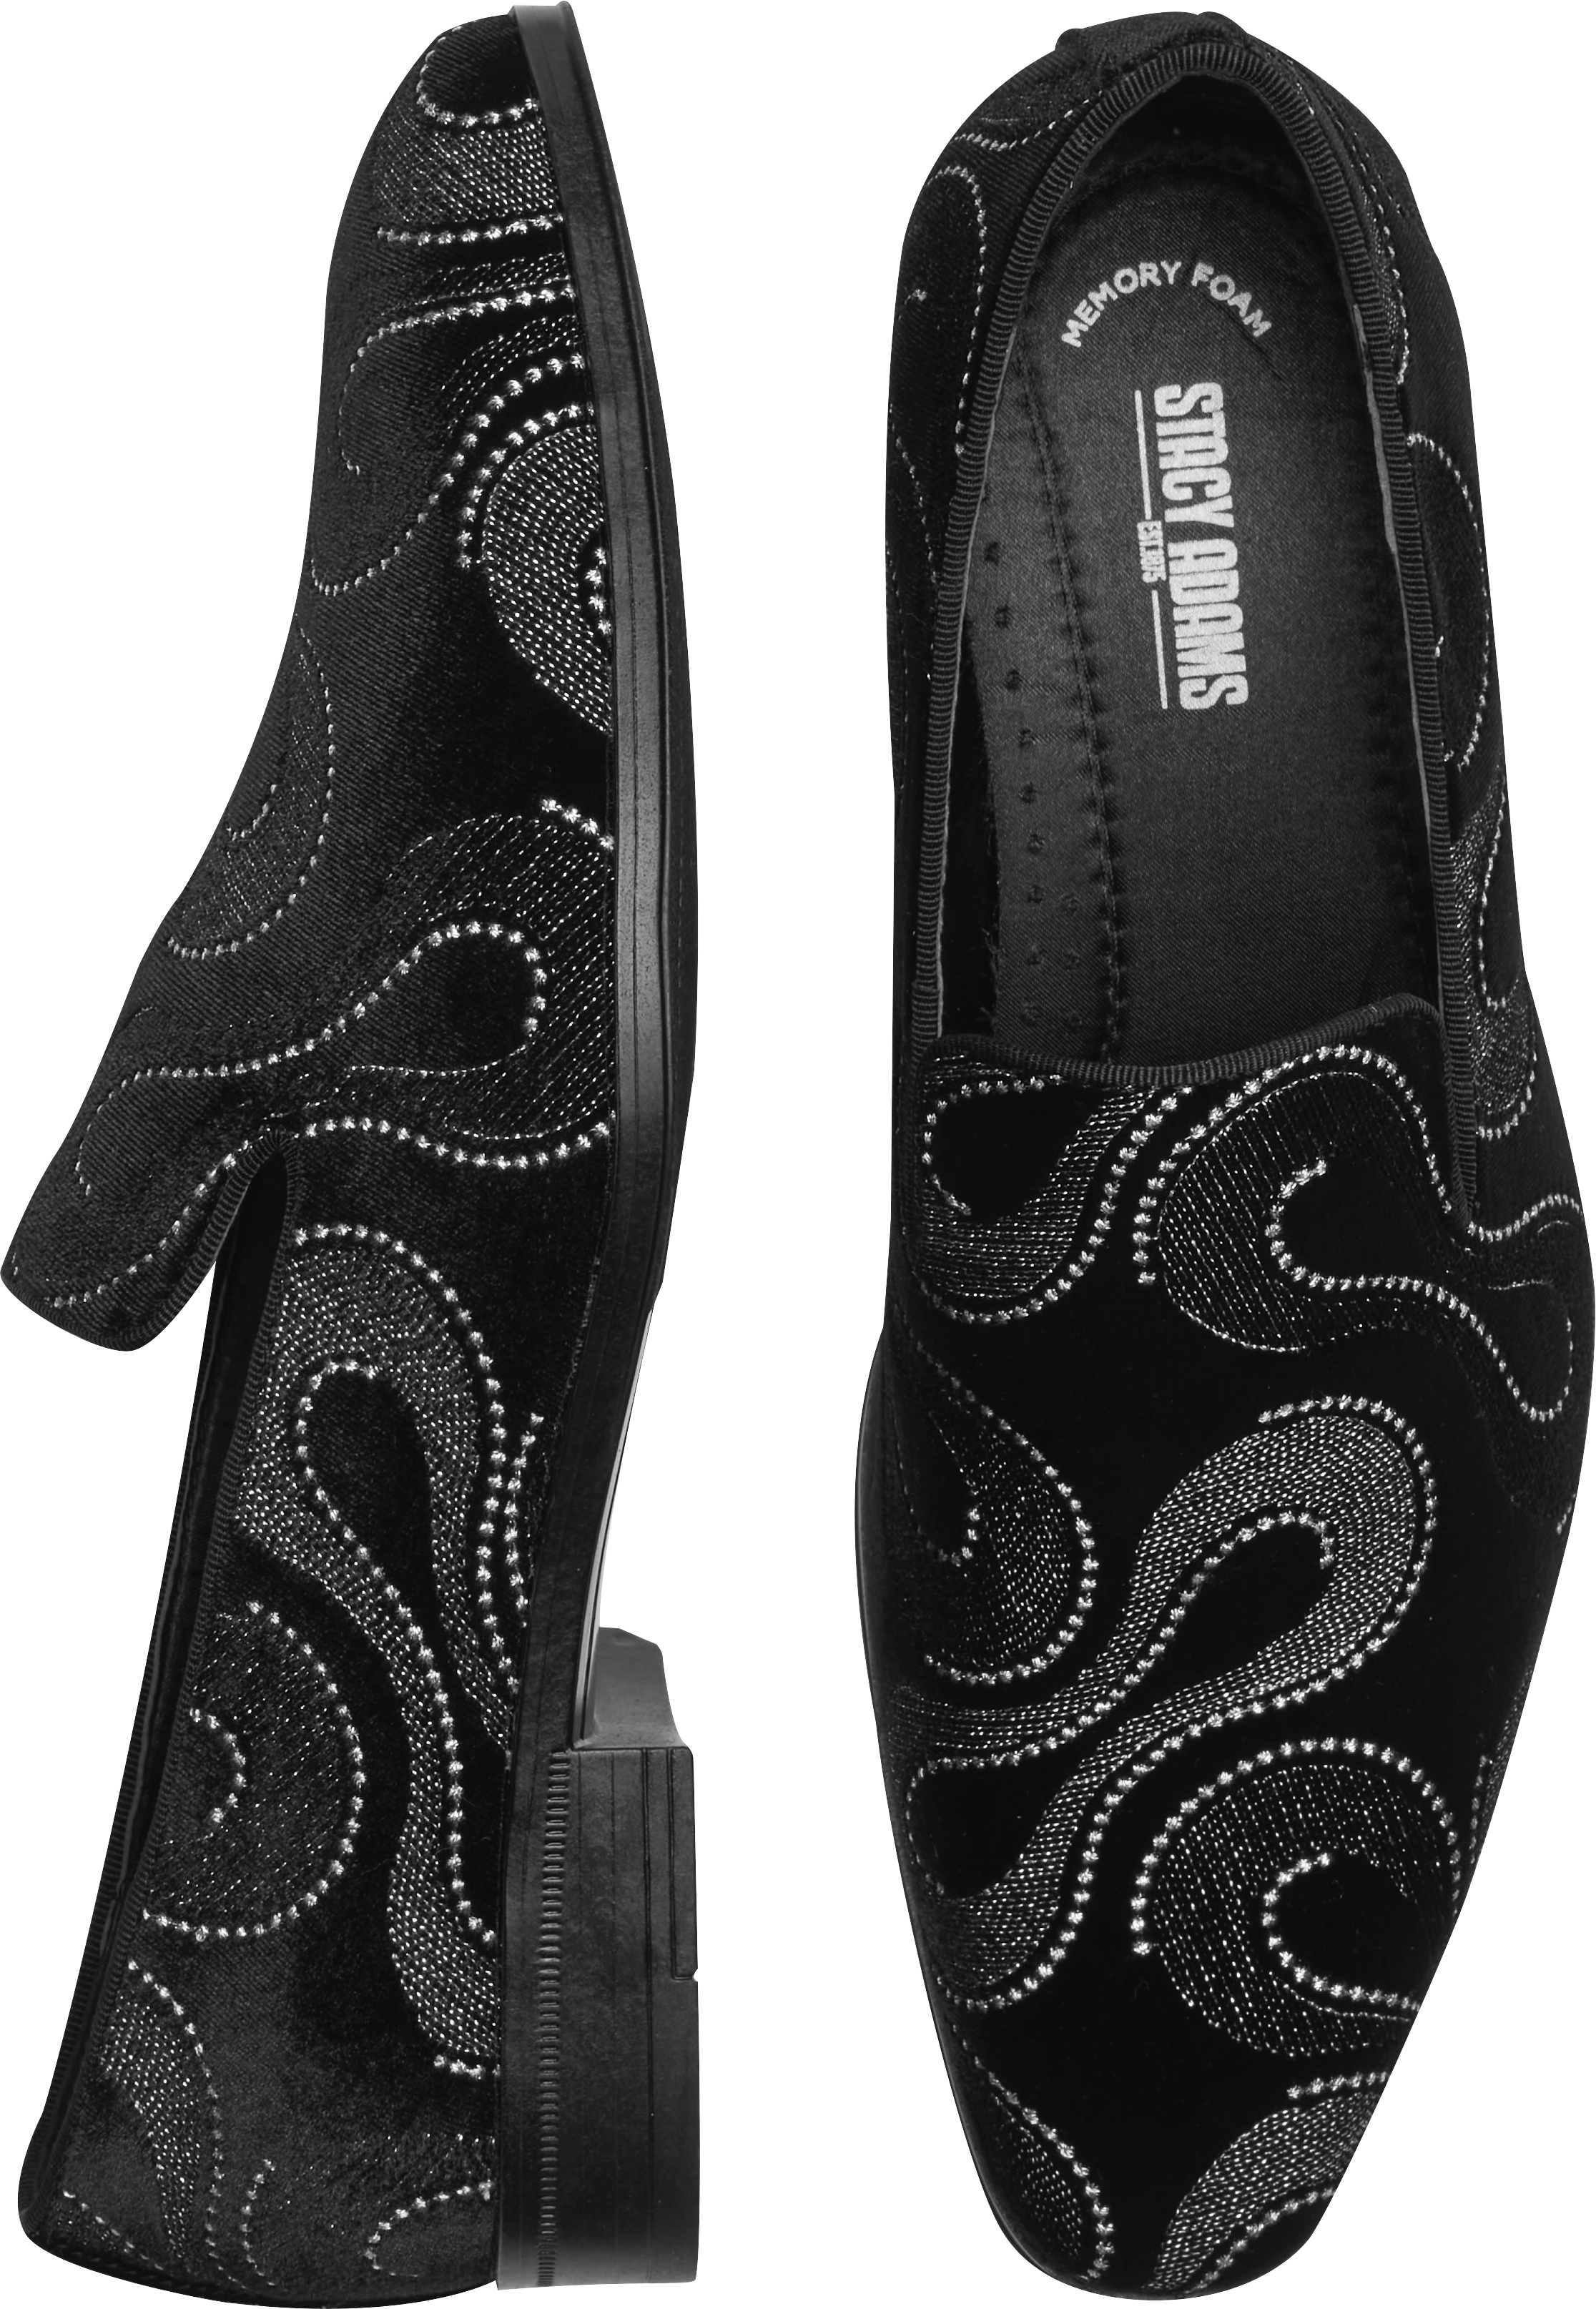 Swainson Embroidered Swirl Slip-On Formal Shoes